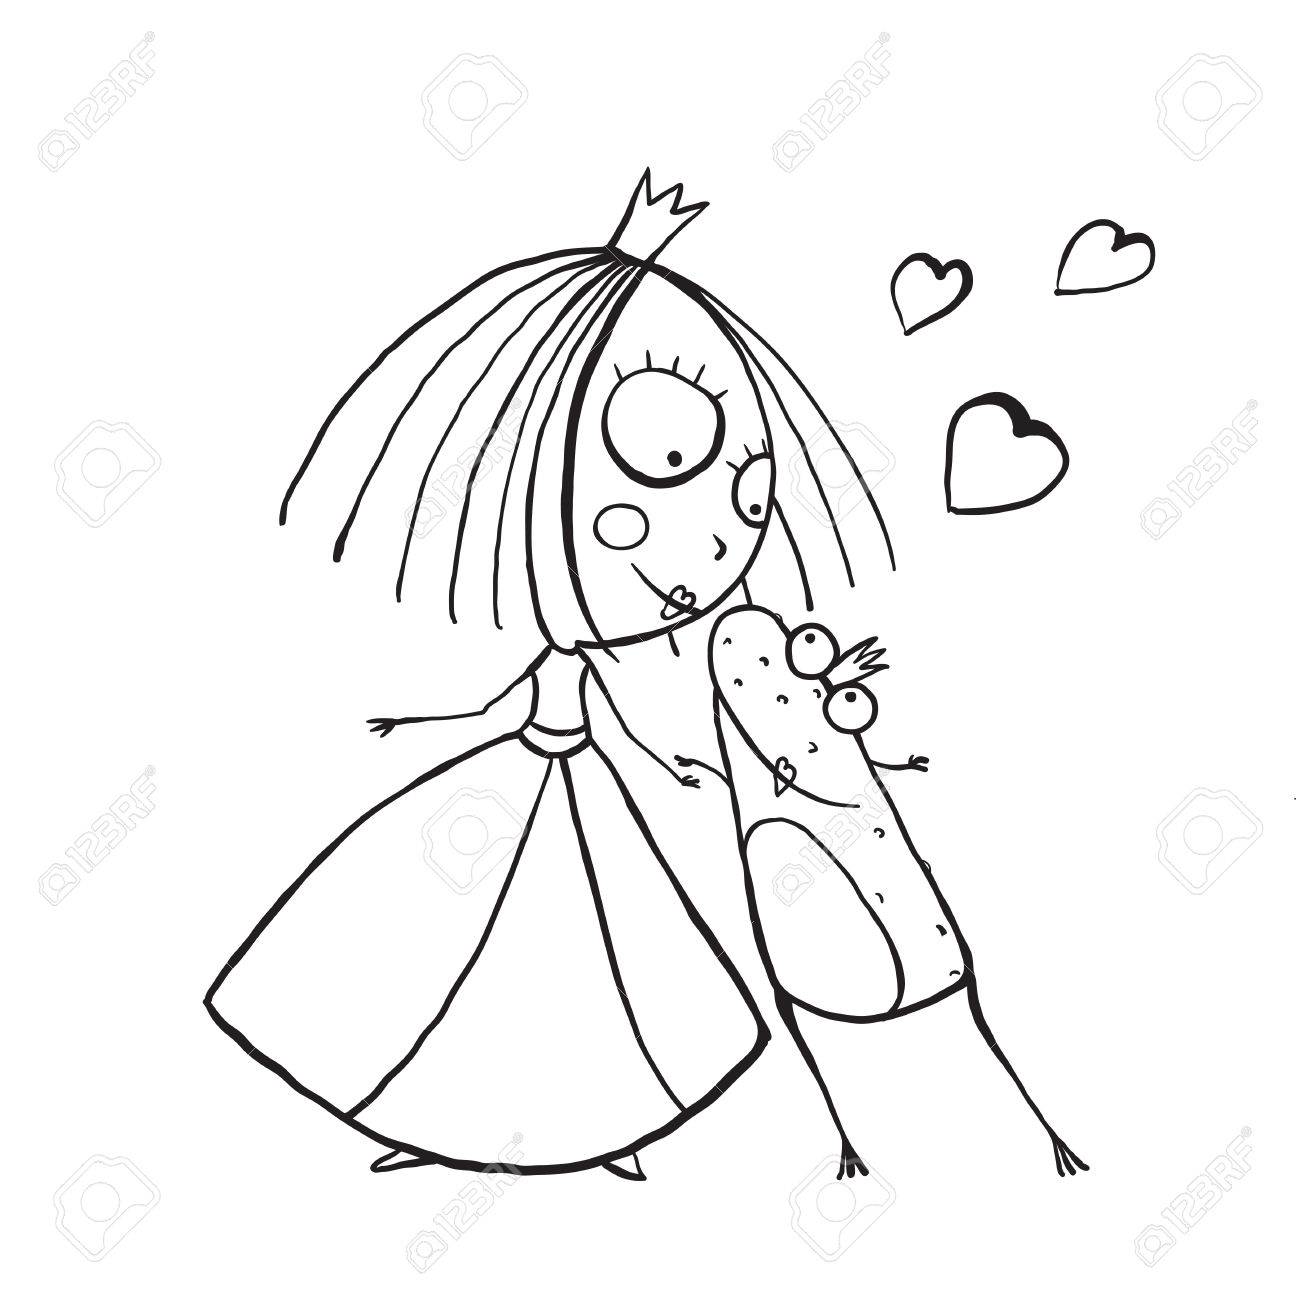 Baby princess and prince frog kissing coloring page kids love story cute and fun hand drawn outline illustration royalty free svg cliparts vectors and stock illustration image